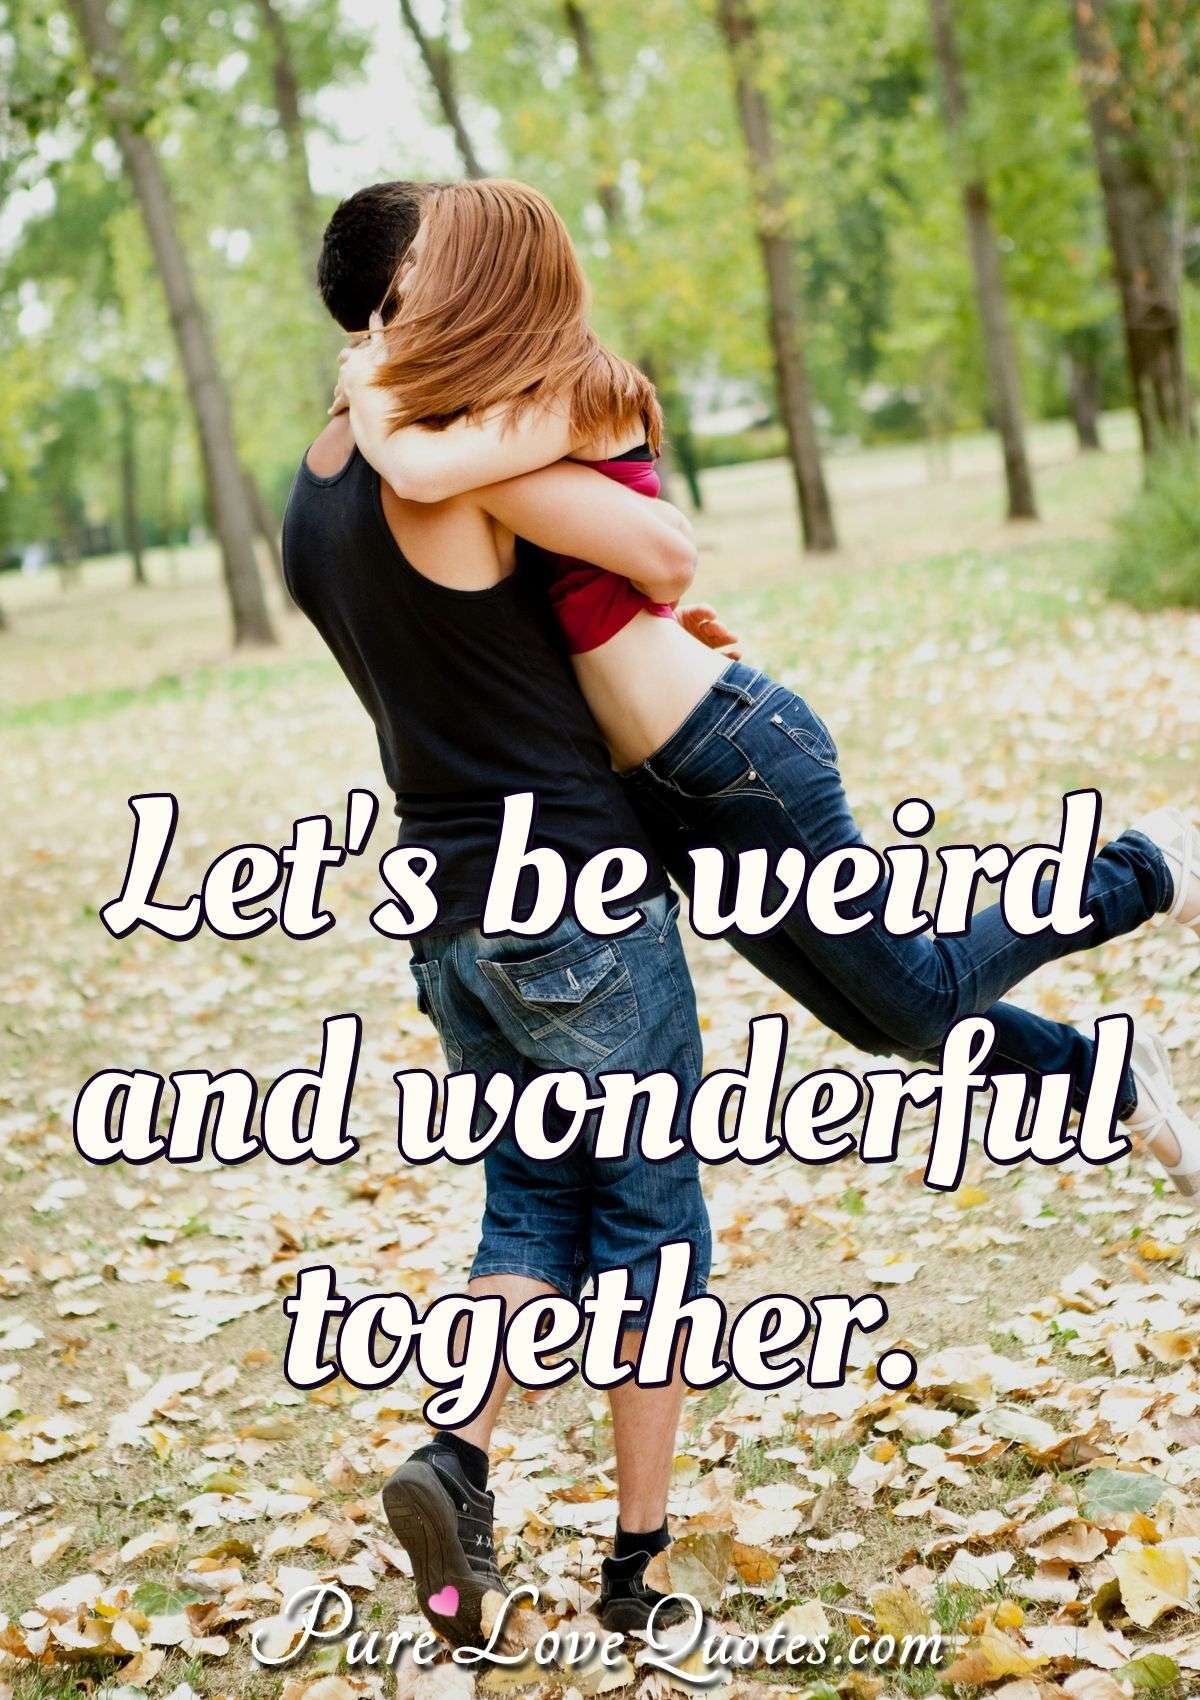 Let's be weird and wonderful together. - Anonymous